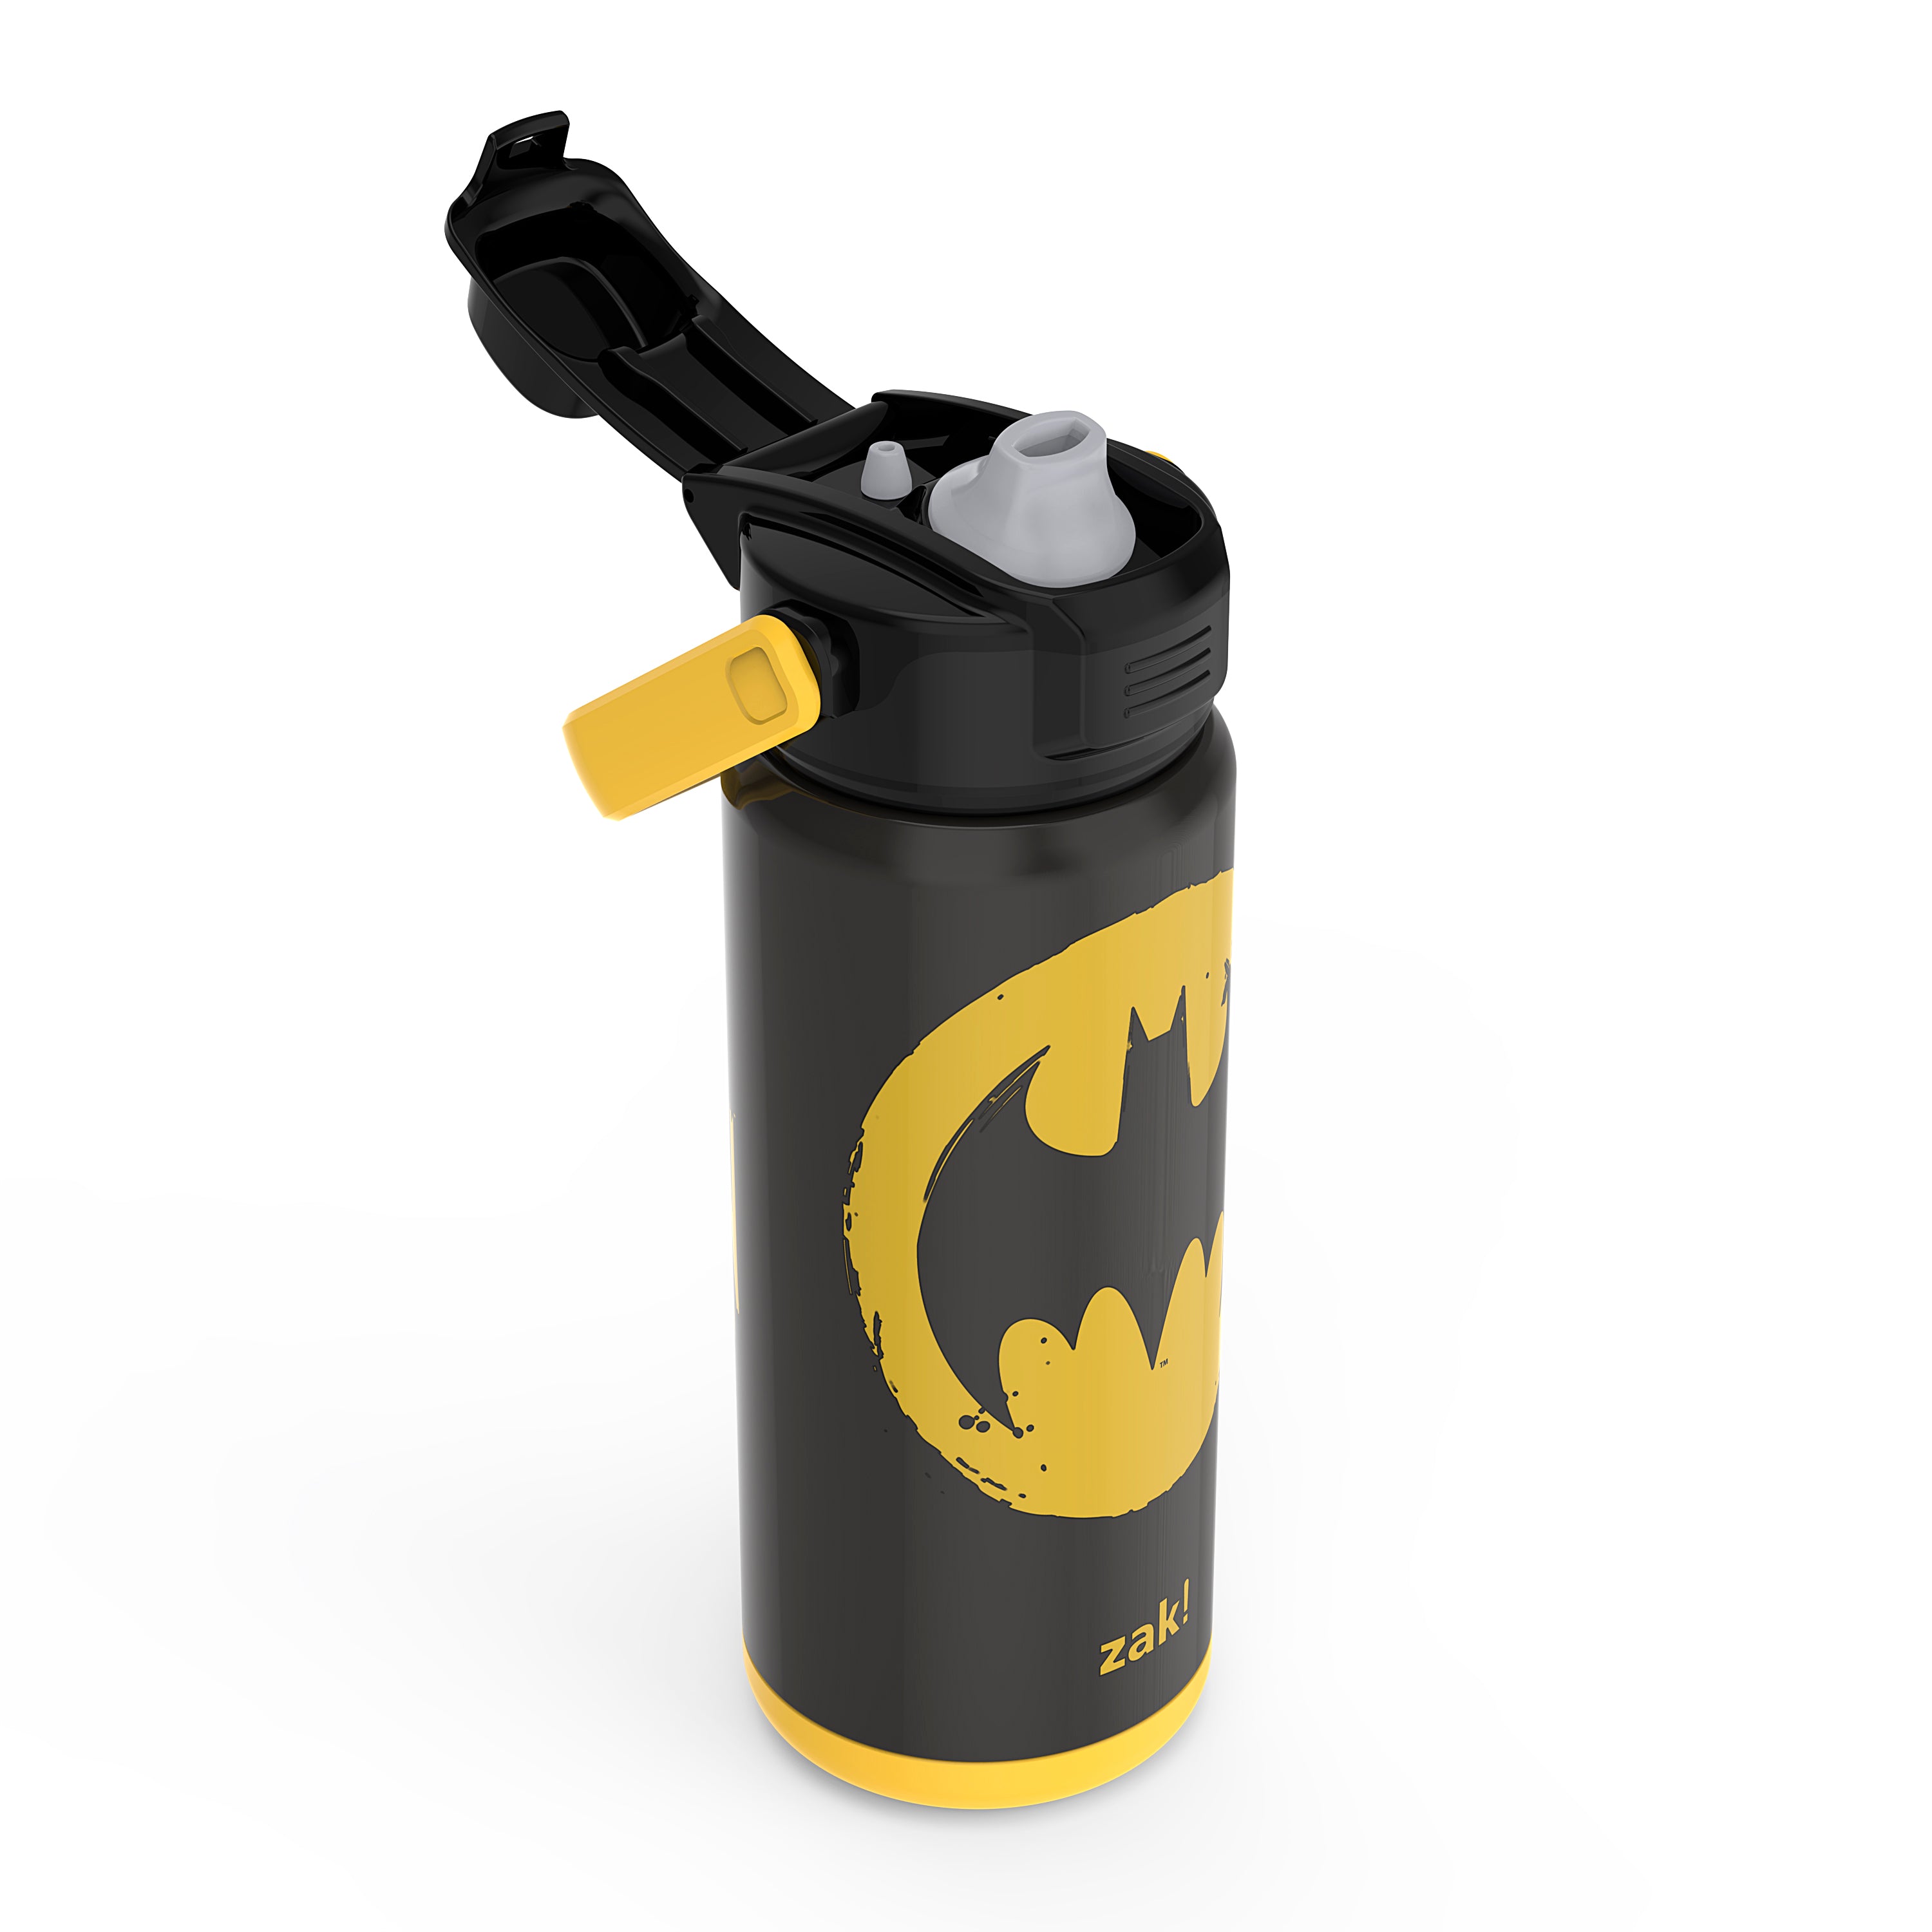 DC Batman Stainless Steel Water Bottle - Wide Mouth Double Walled Vacuum Insulated Bottle for Hot and Cold Beverages - 550ml/18oz